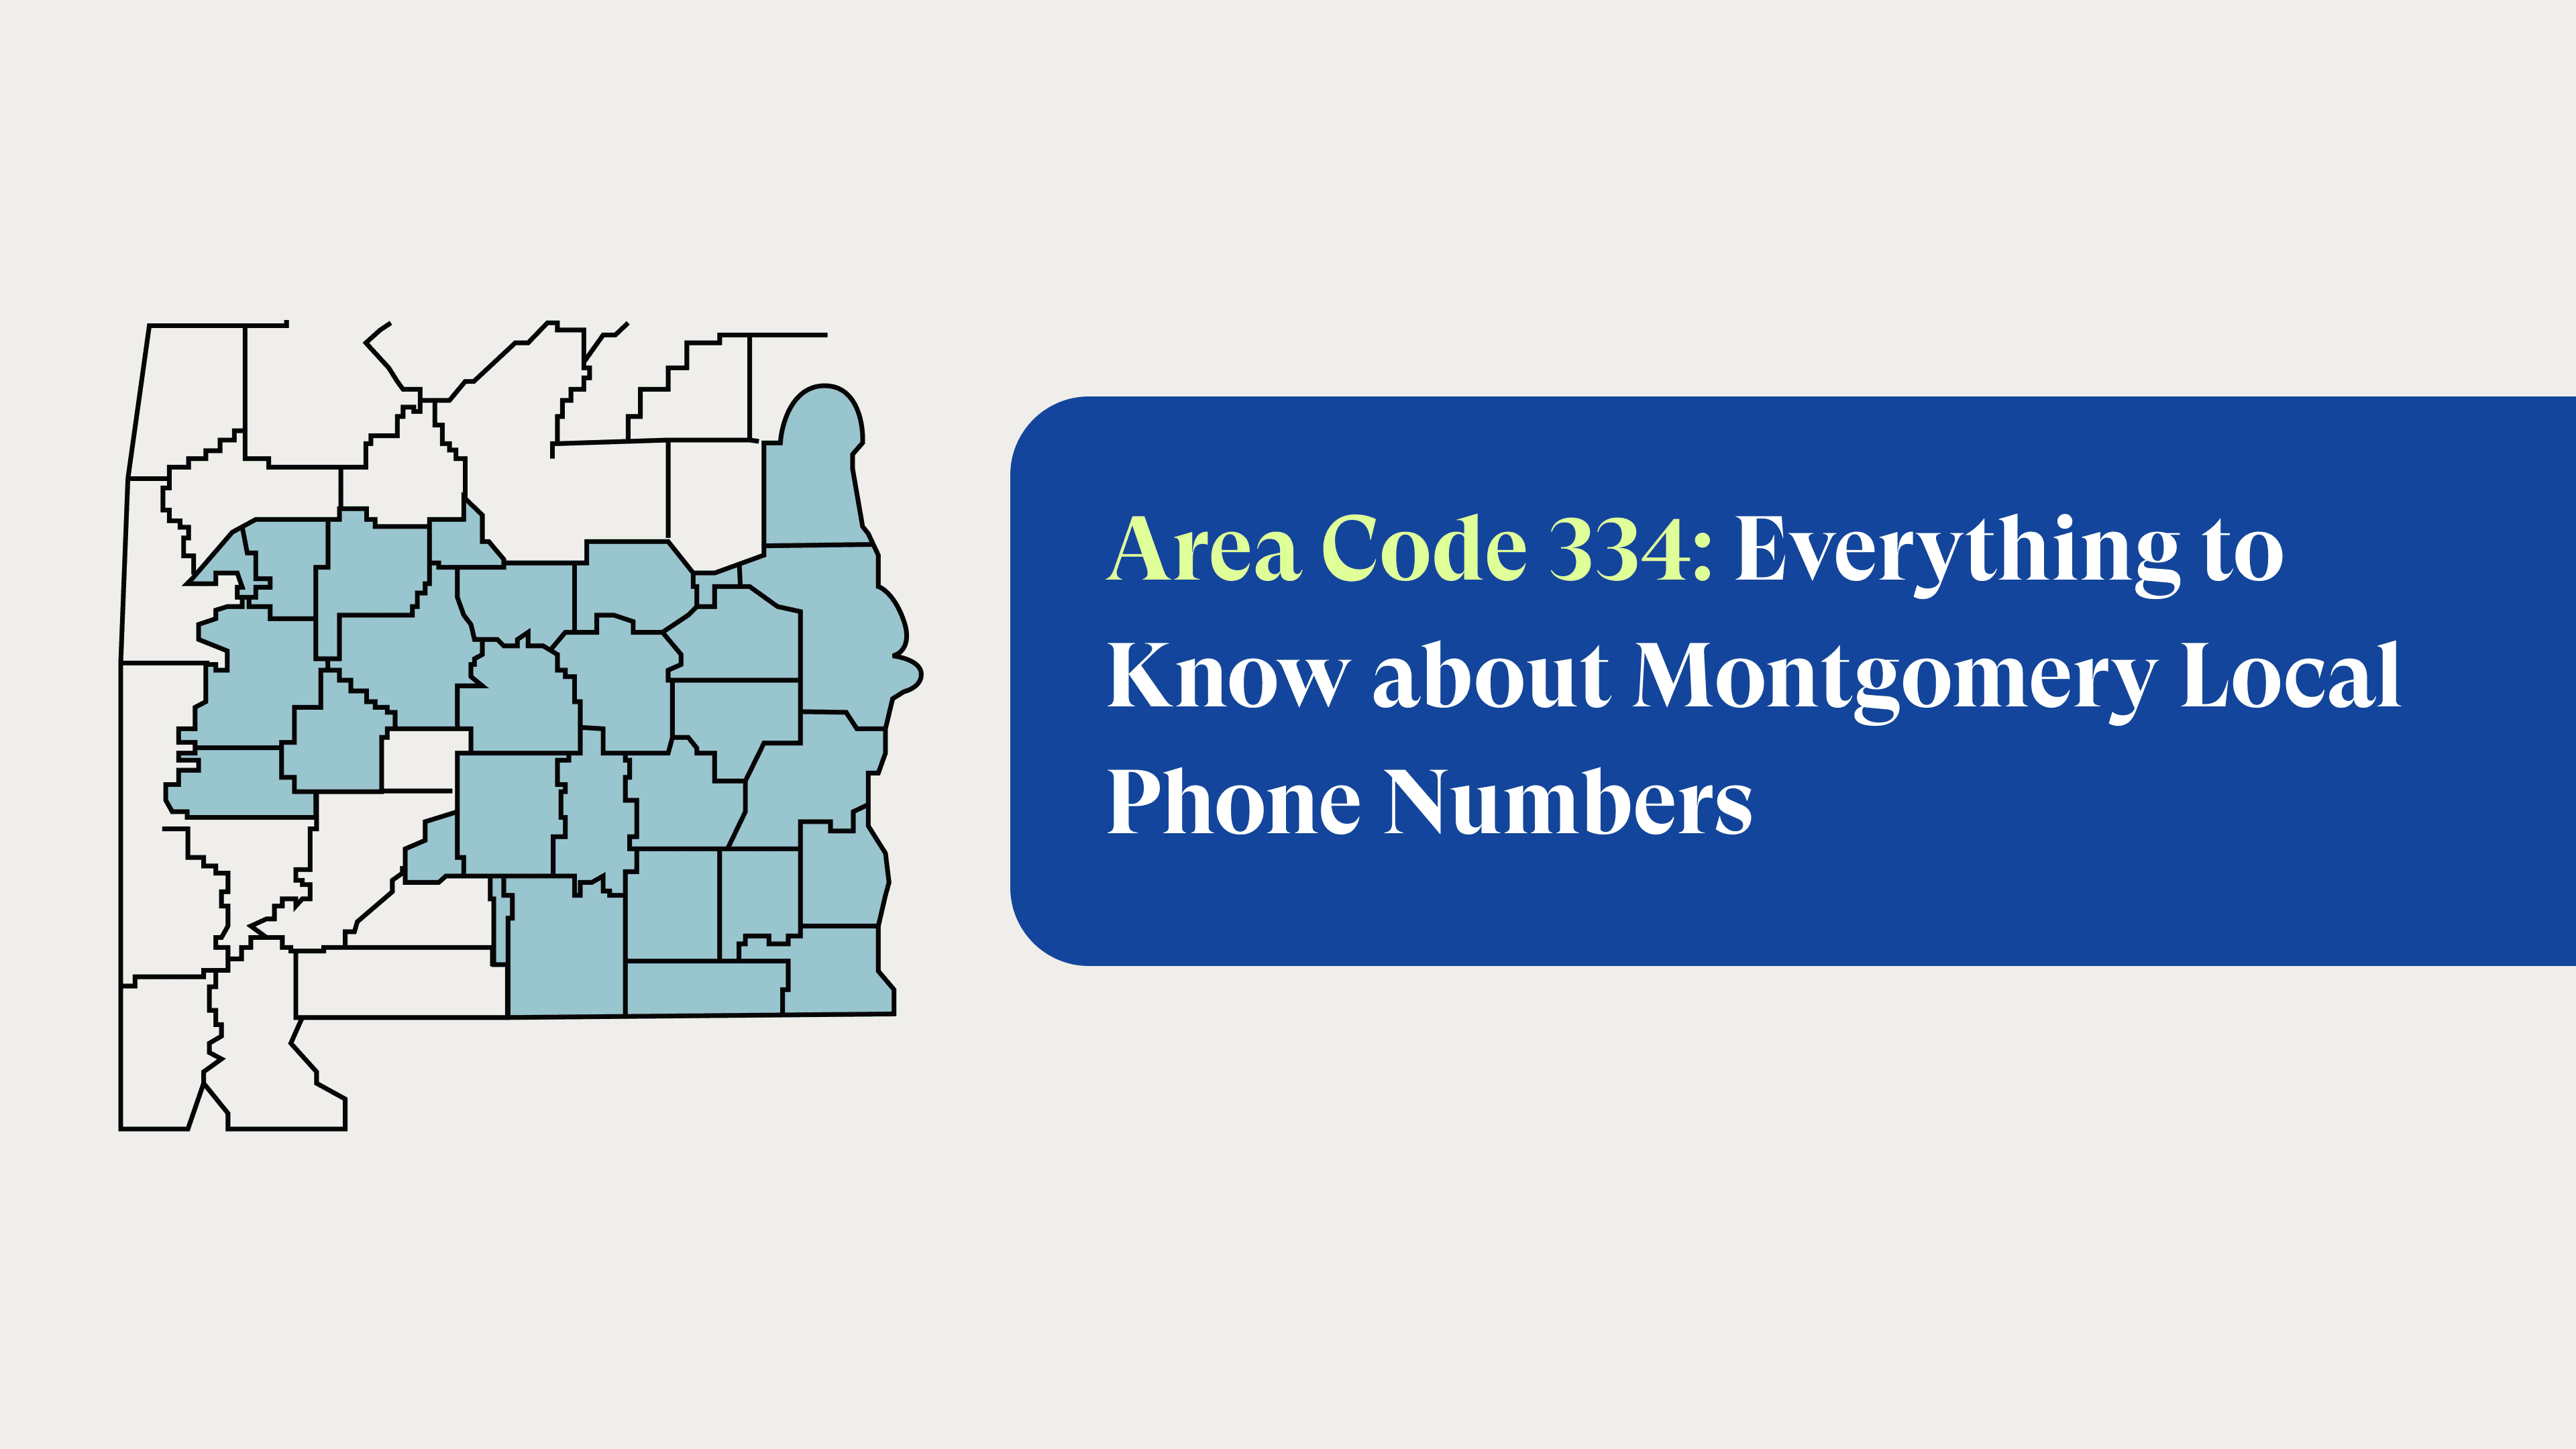 Area Code 334: Everything to Know about Montgomery Local Phone Numbers